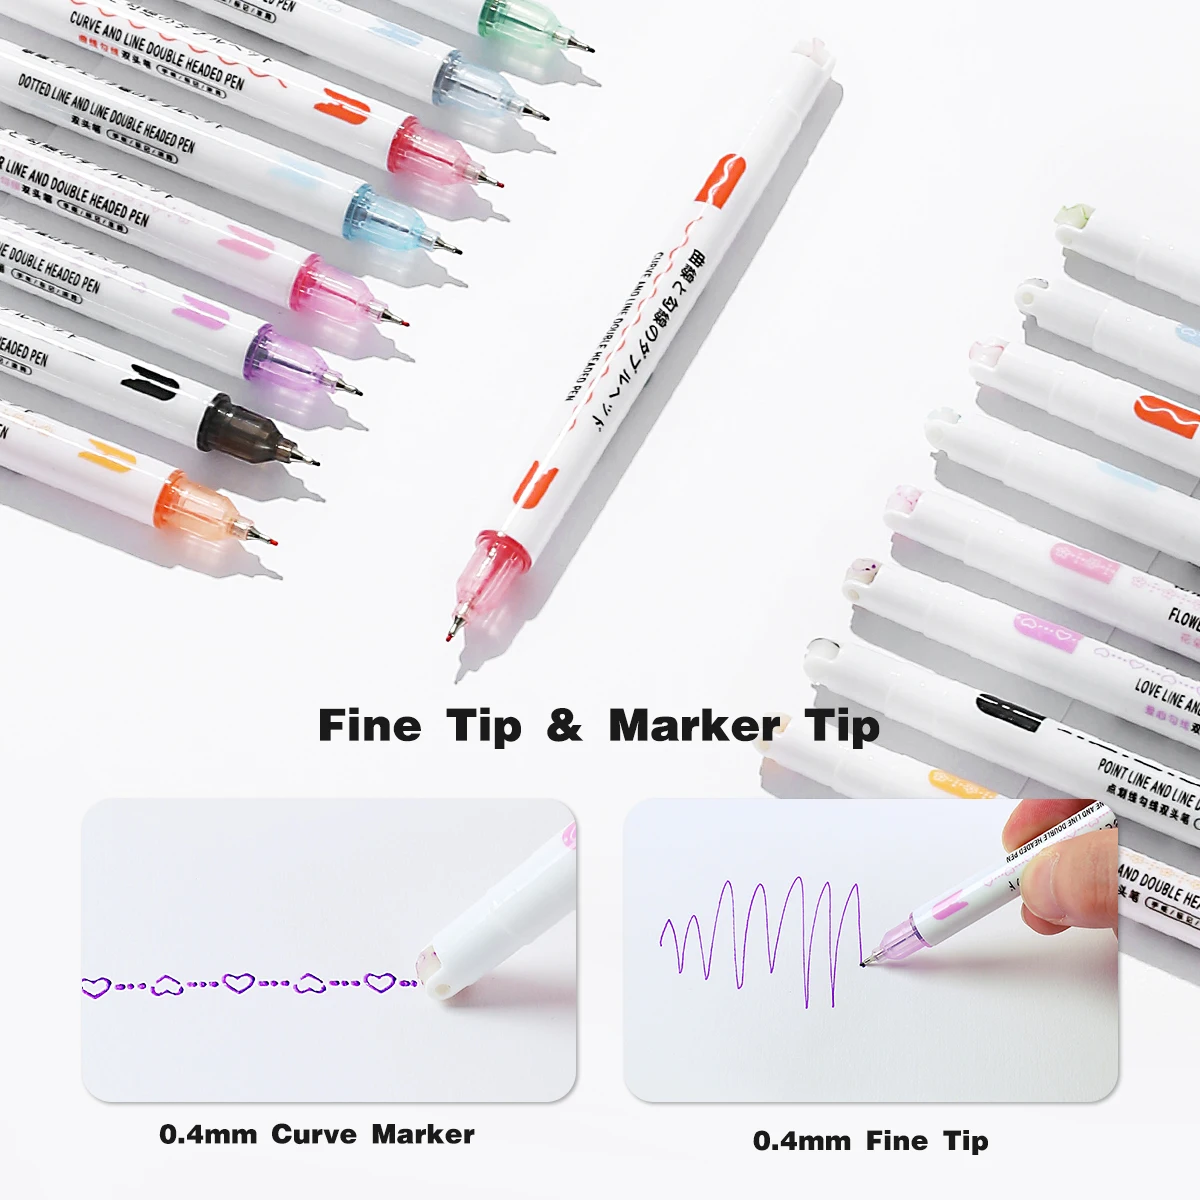 https://ae01.alicdn.com/kf/S1297e4ee429b4213aa52822be45dc448K/8pcs-Dual-Line-Contour-Markers-Dual-Tip-Curve-Pens-Multicolor-Fun-Curved-Pens-Quick-Dry-Markers.jpg